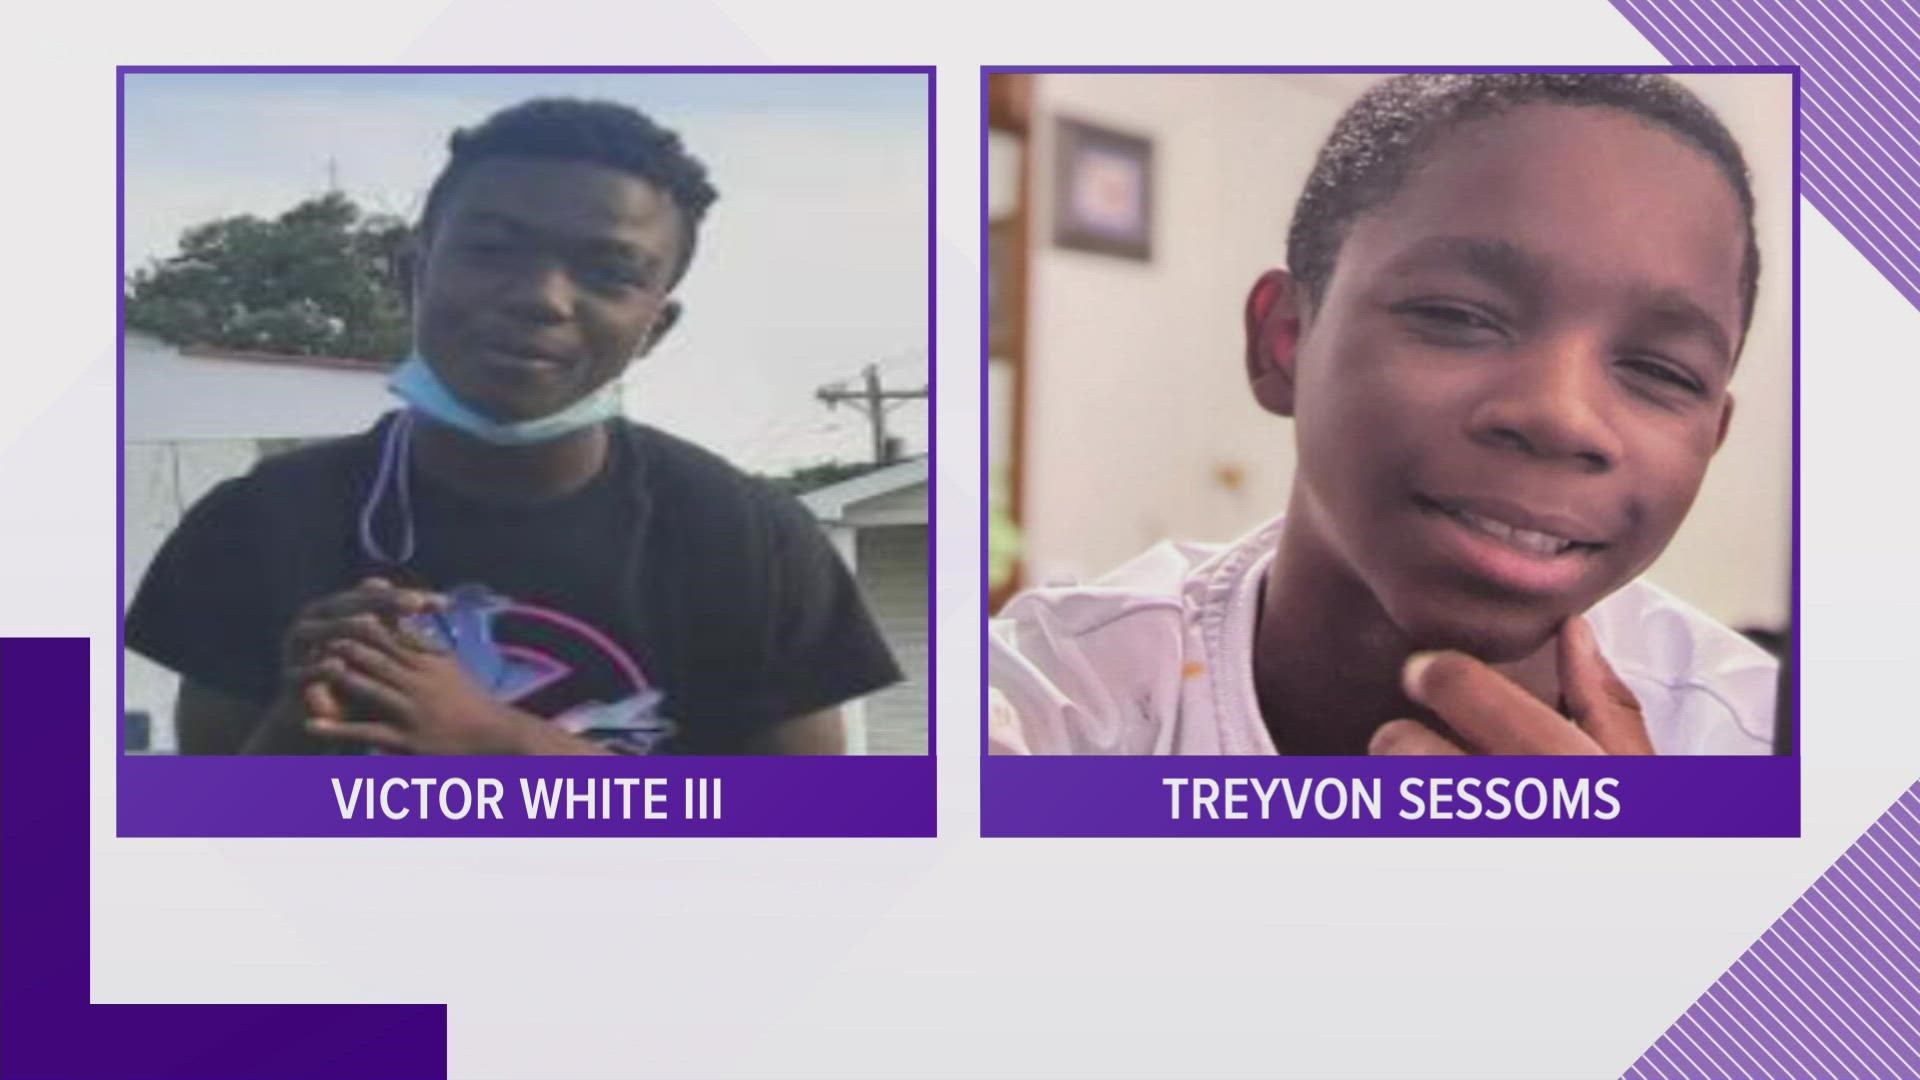 The boys, Victor White III and Treyvon Sessoms, were last seen on October 12. If you know where they might be, call the police department at 252-621-7106.